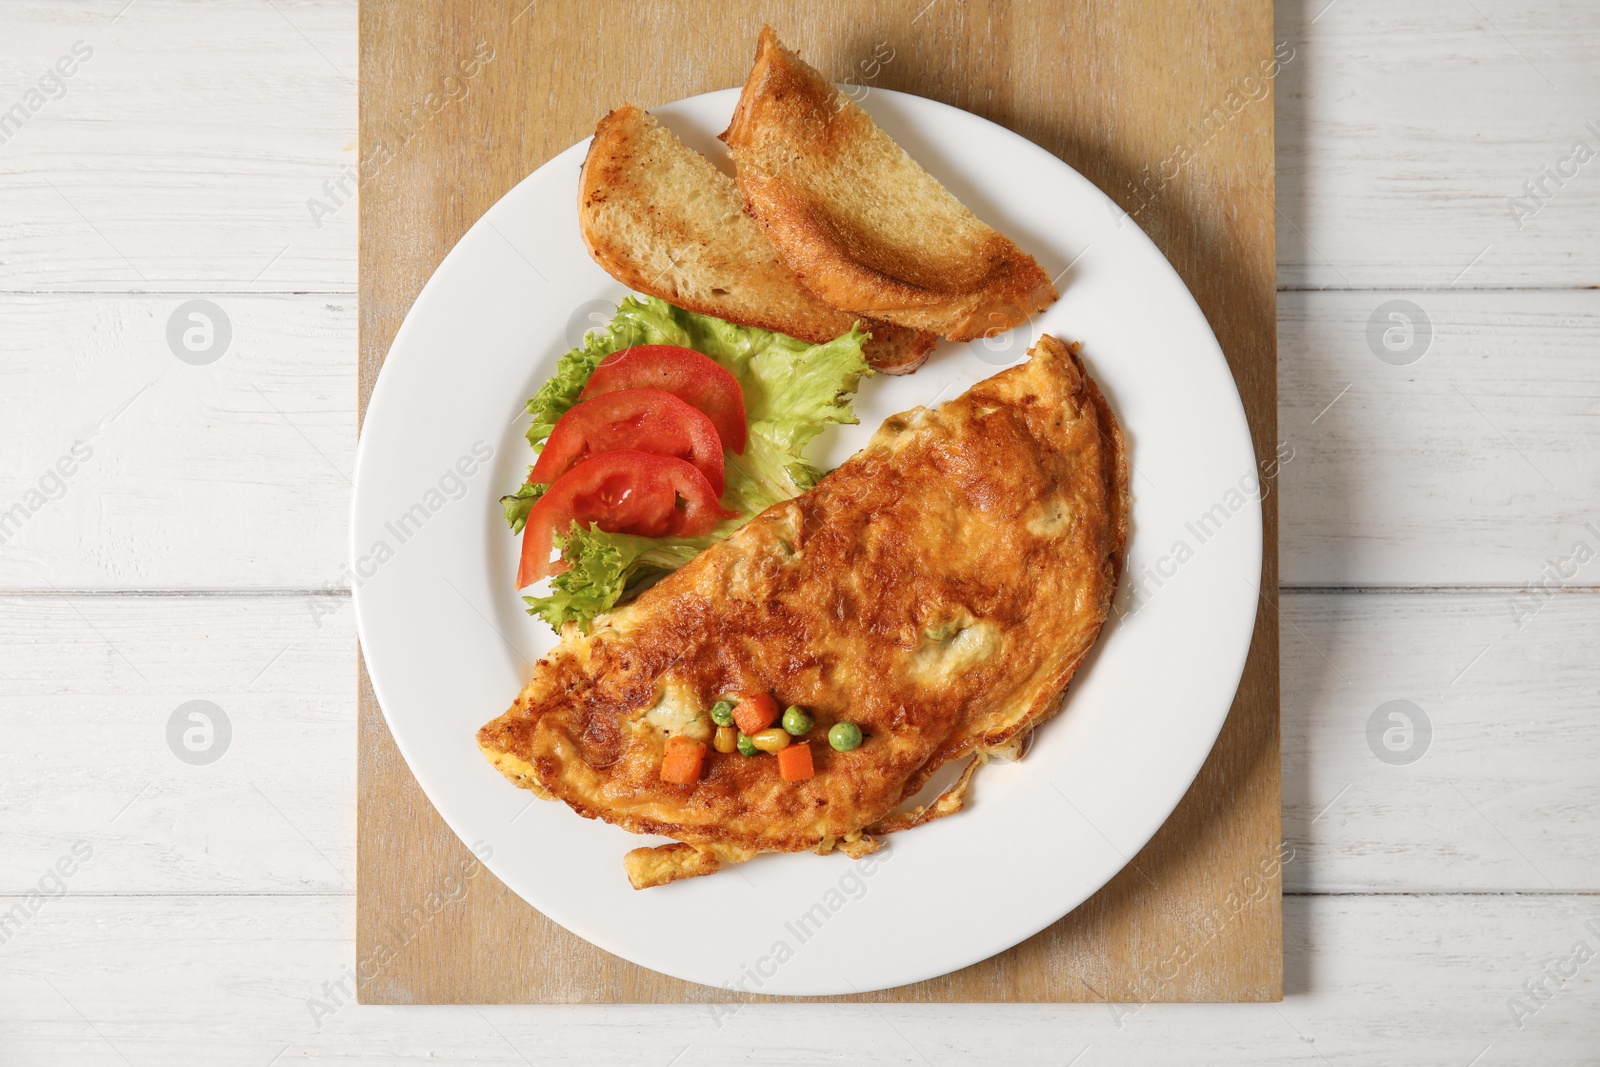 Photo of Omelet with vegetables on plate served for breakfast, top view